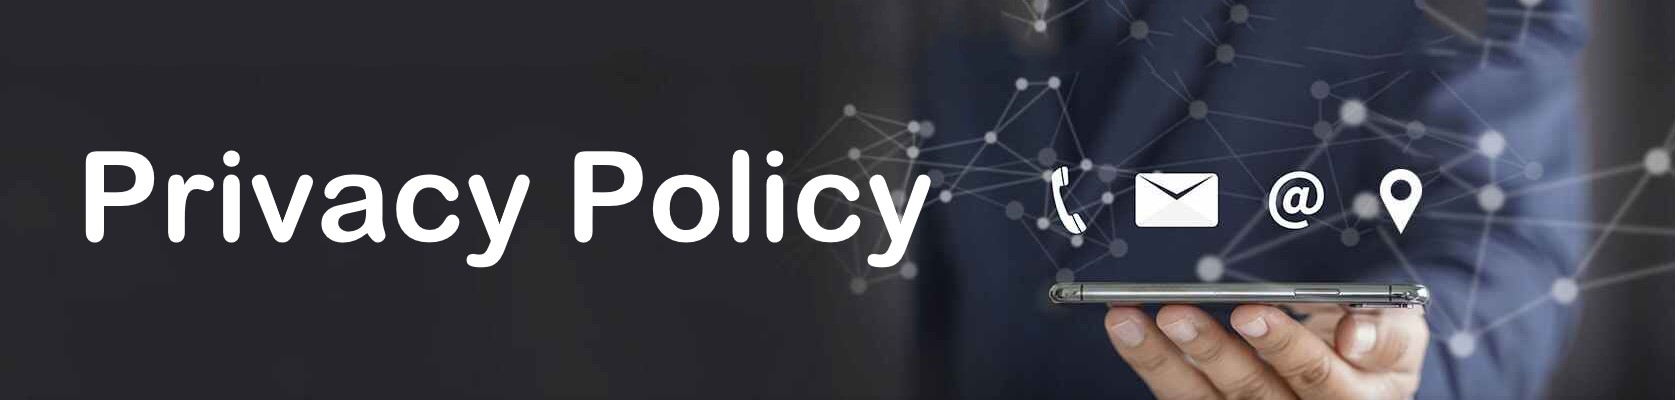 Privacy Policy for Athas Technology LLP